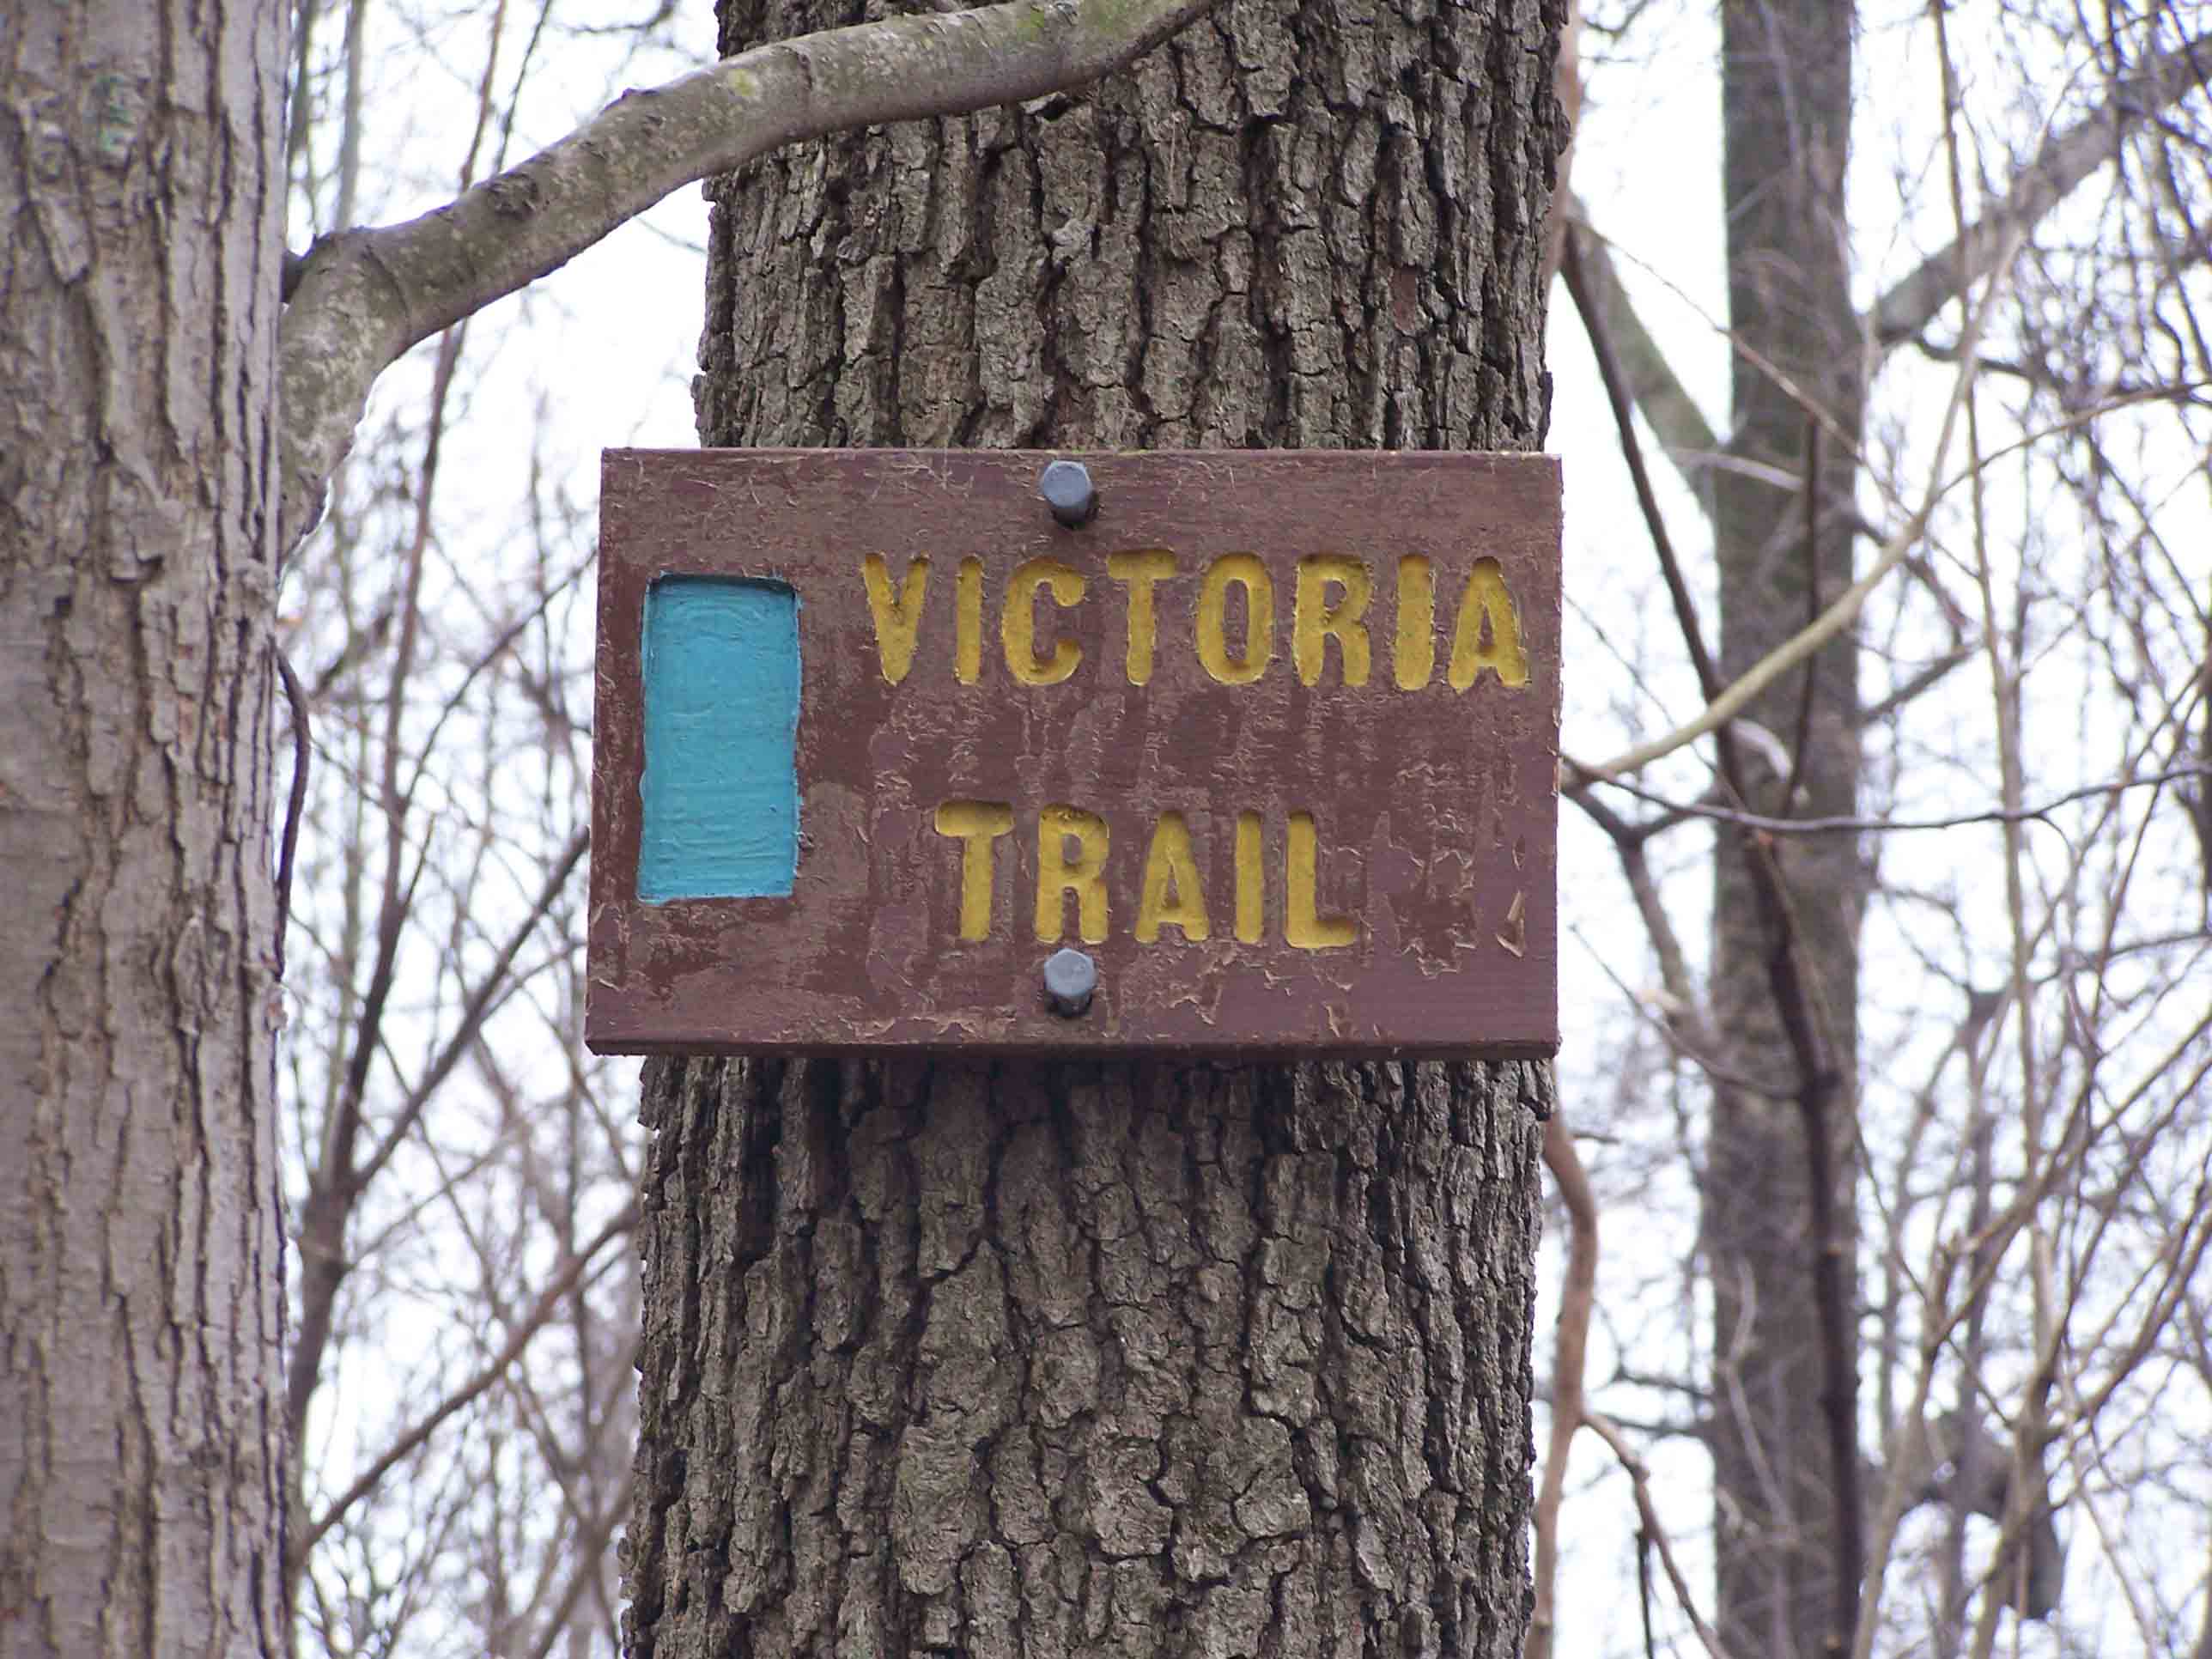 mm 5.7: Sign for southbound Victoria Trail to PA 325. The trailhead for the northbound trail is about a hundred yards further west (trail south). Courtesy at@rohland.org